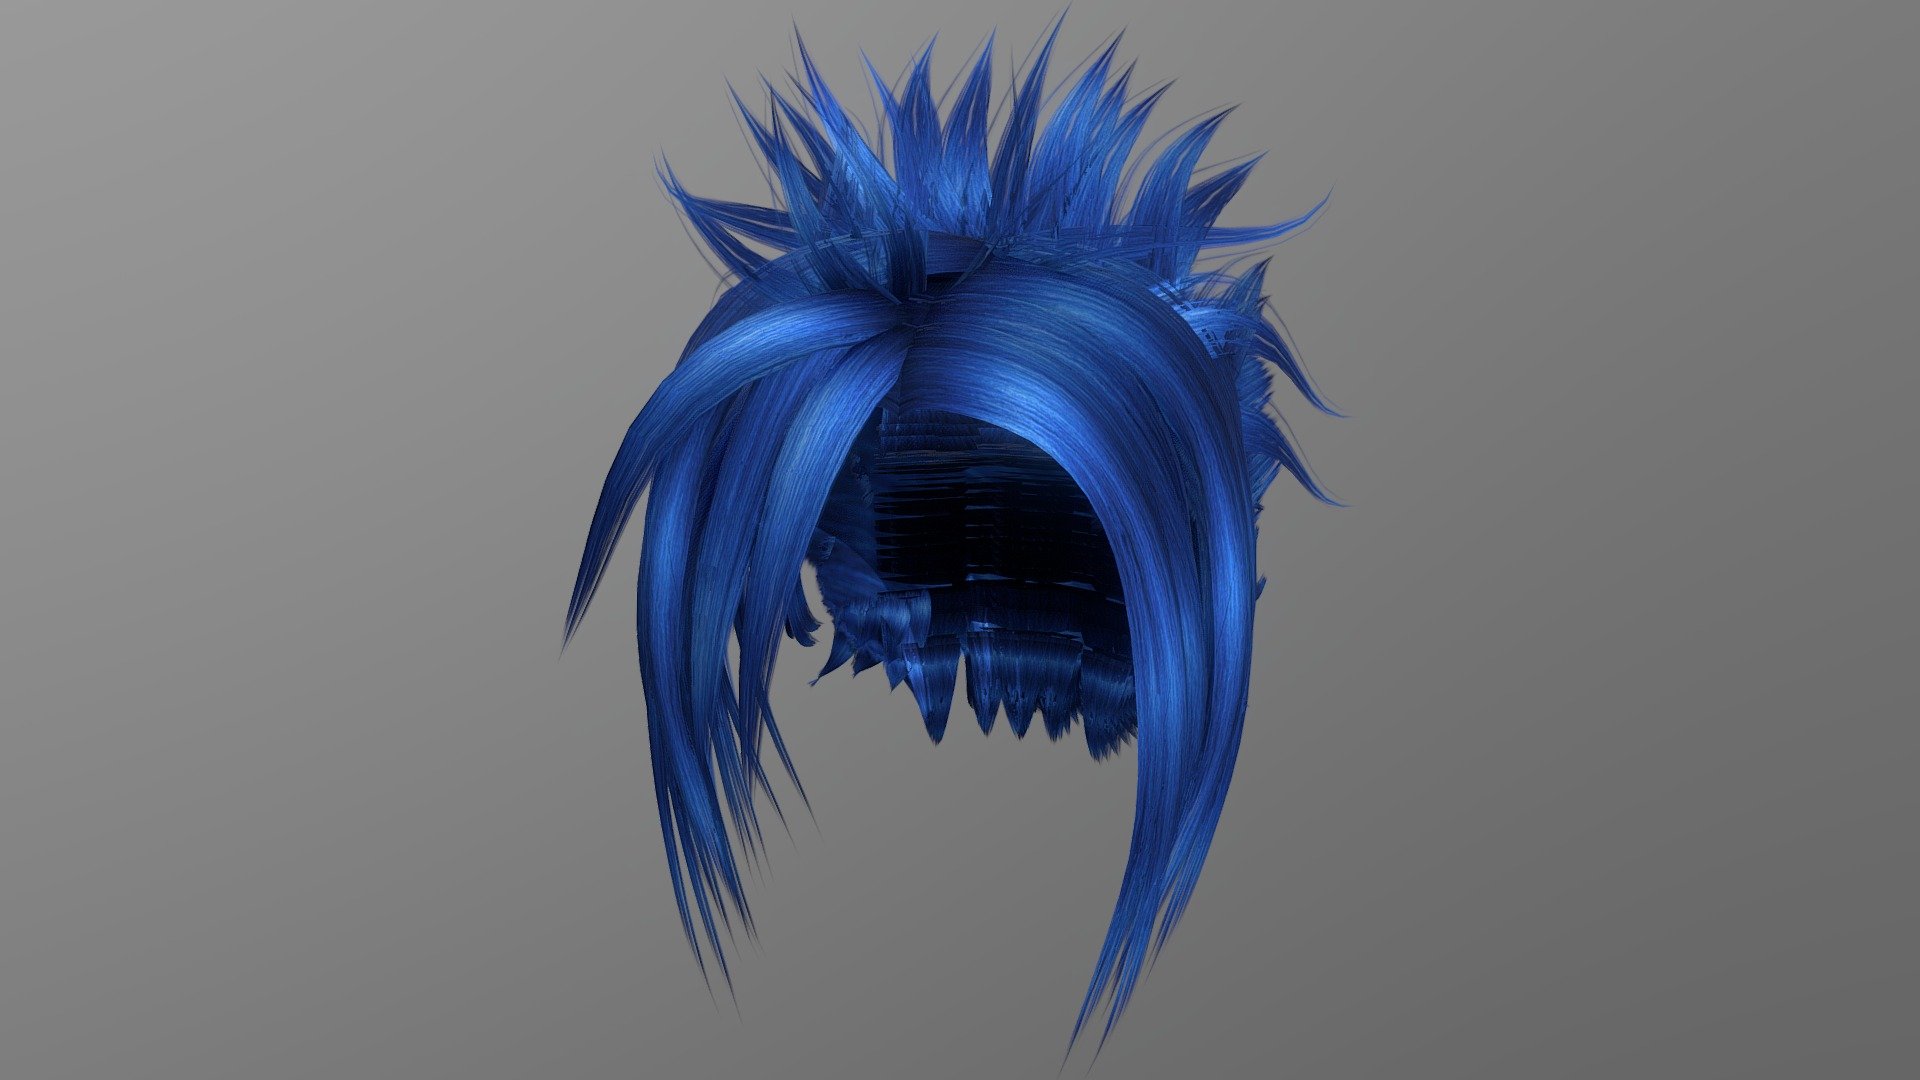 Anime Hair (Blue)
Bring your 3D model of an Anime hairstyle to life with this high-poly design. Perfect for use in games, animations, VR, AR, and more, this model is optimized for performance and still retains a high level of detail.


Features



High poly design with 123,262 vertices

233,886 edges

110,910 faces (polygons)

221,820 tris

2k PBR Textures and materials

File formats included: .obj, .fbx, .dae


Tools Used
This Anime hairstyle 3D model was created using Blender 3.3.1, a popular and versatile 3D creation software.


Availability
This high-poly Anime hairstyle 3D model is ready for use and available for purchase. Bring your project to the next level with this high-quality and optimized model 3d model